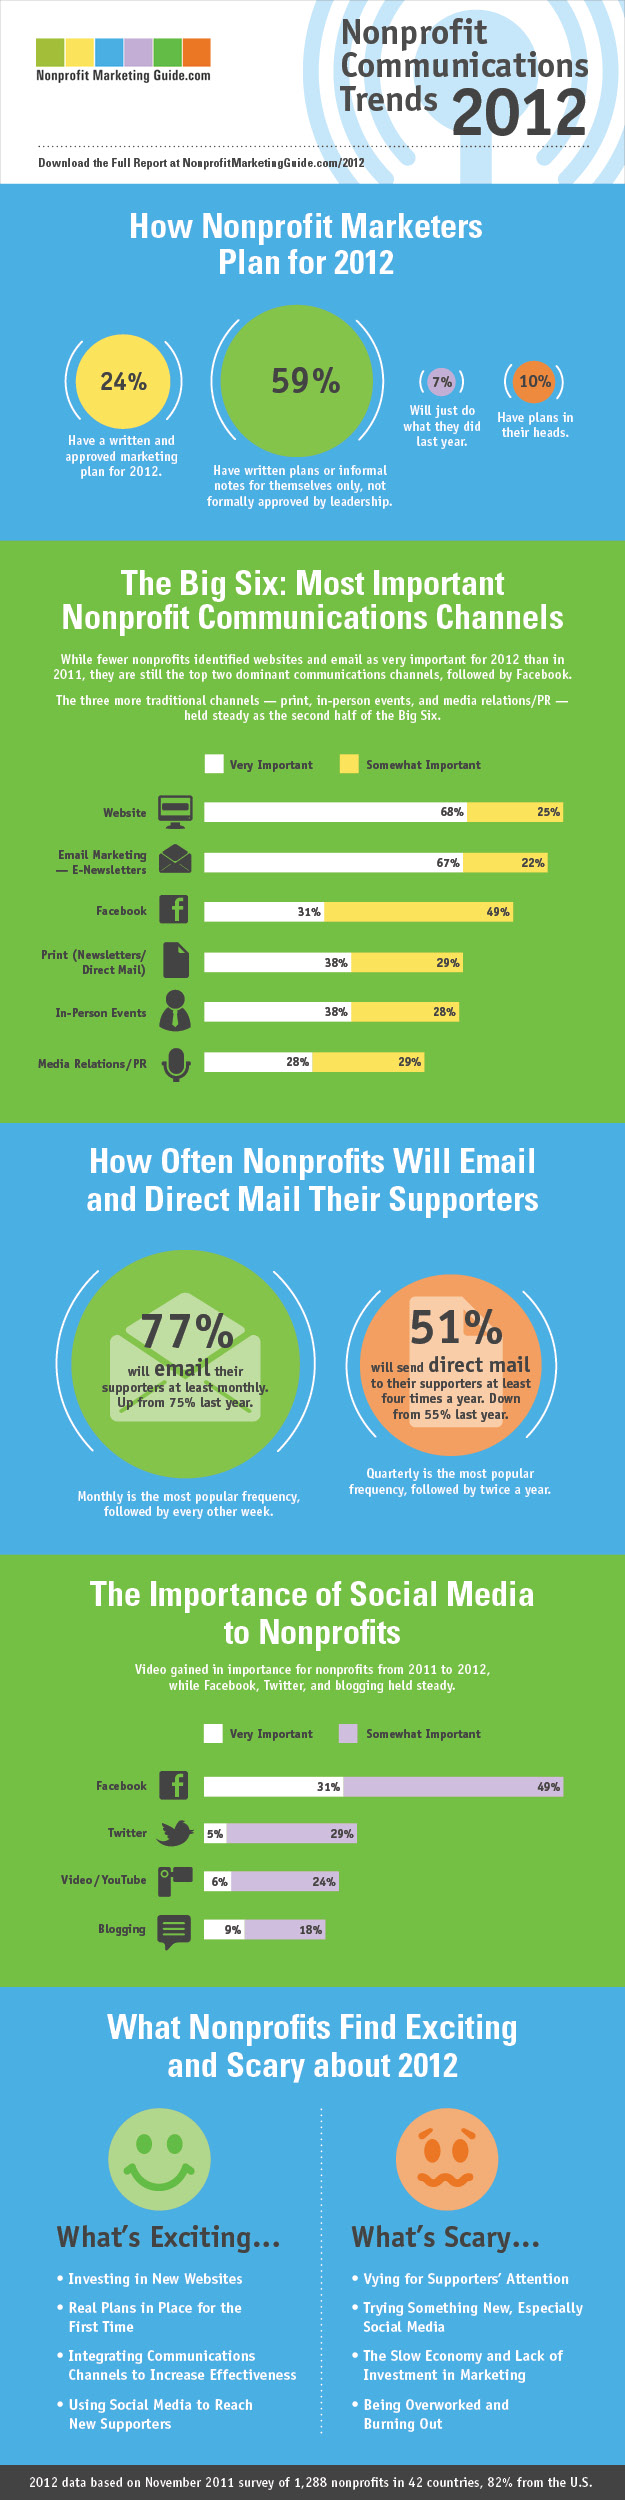 Nonprofit Communications Trends for 2012 Infographic